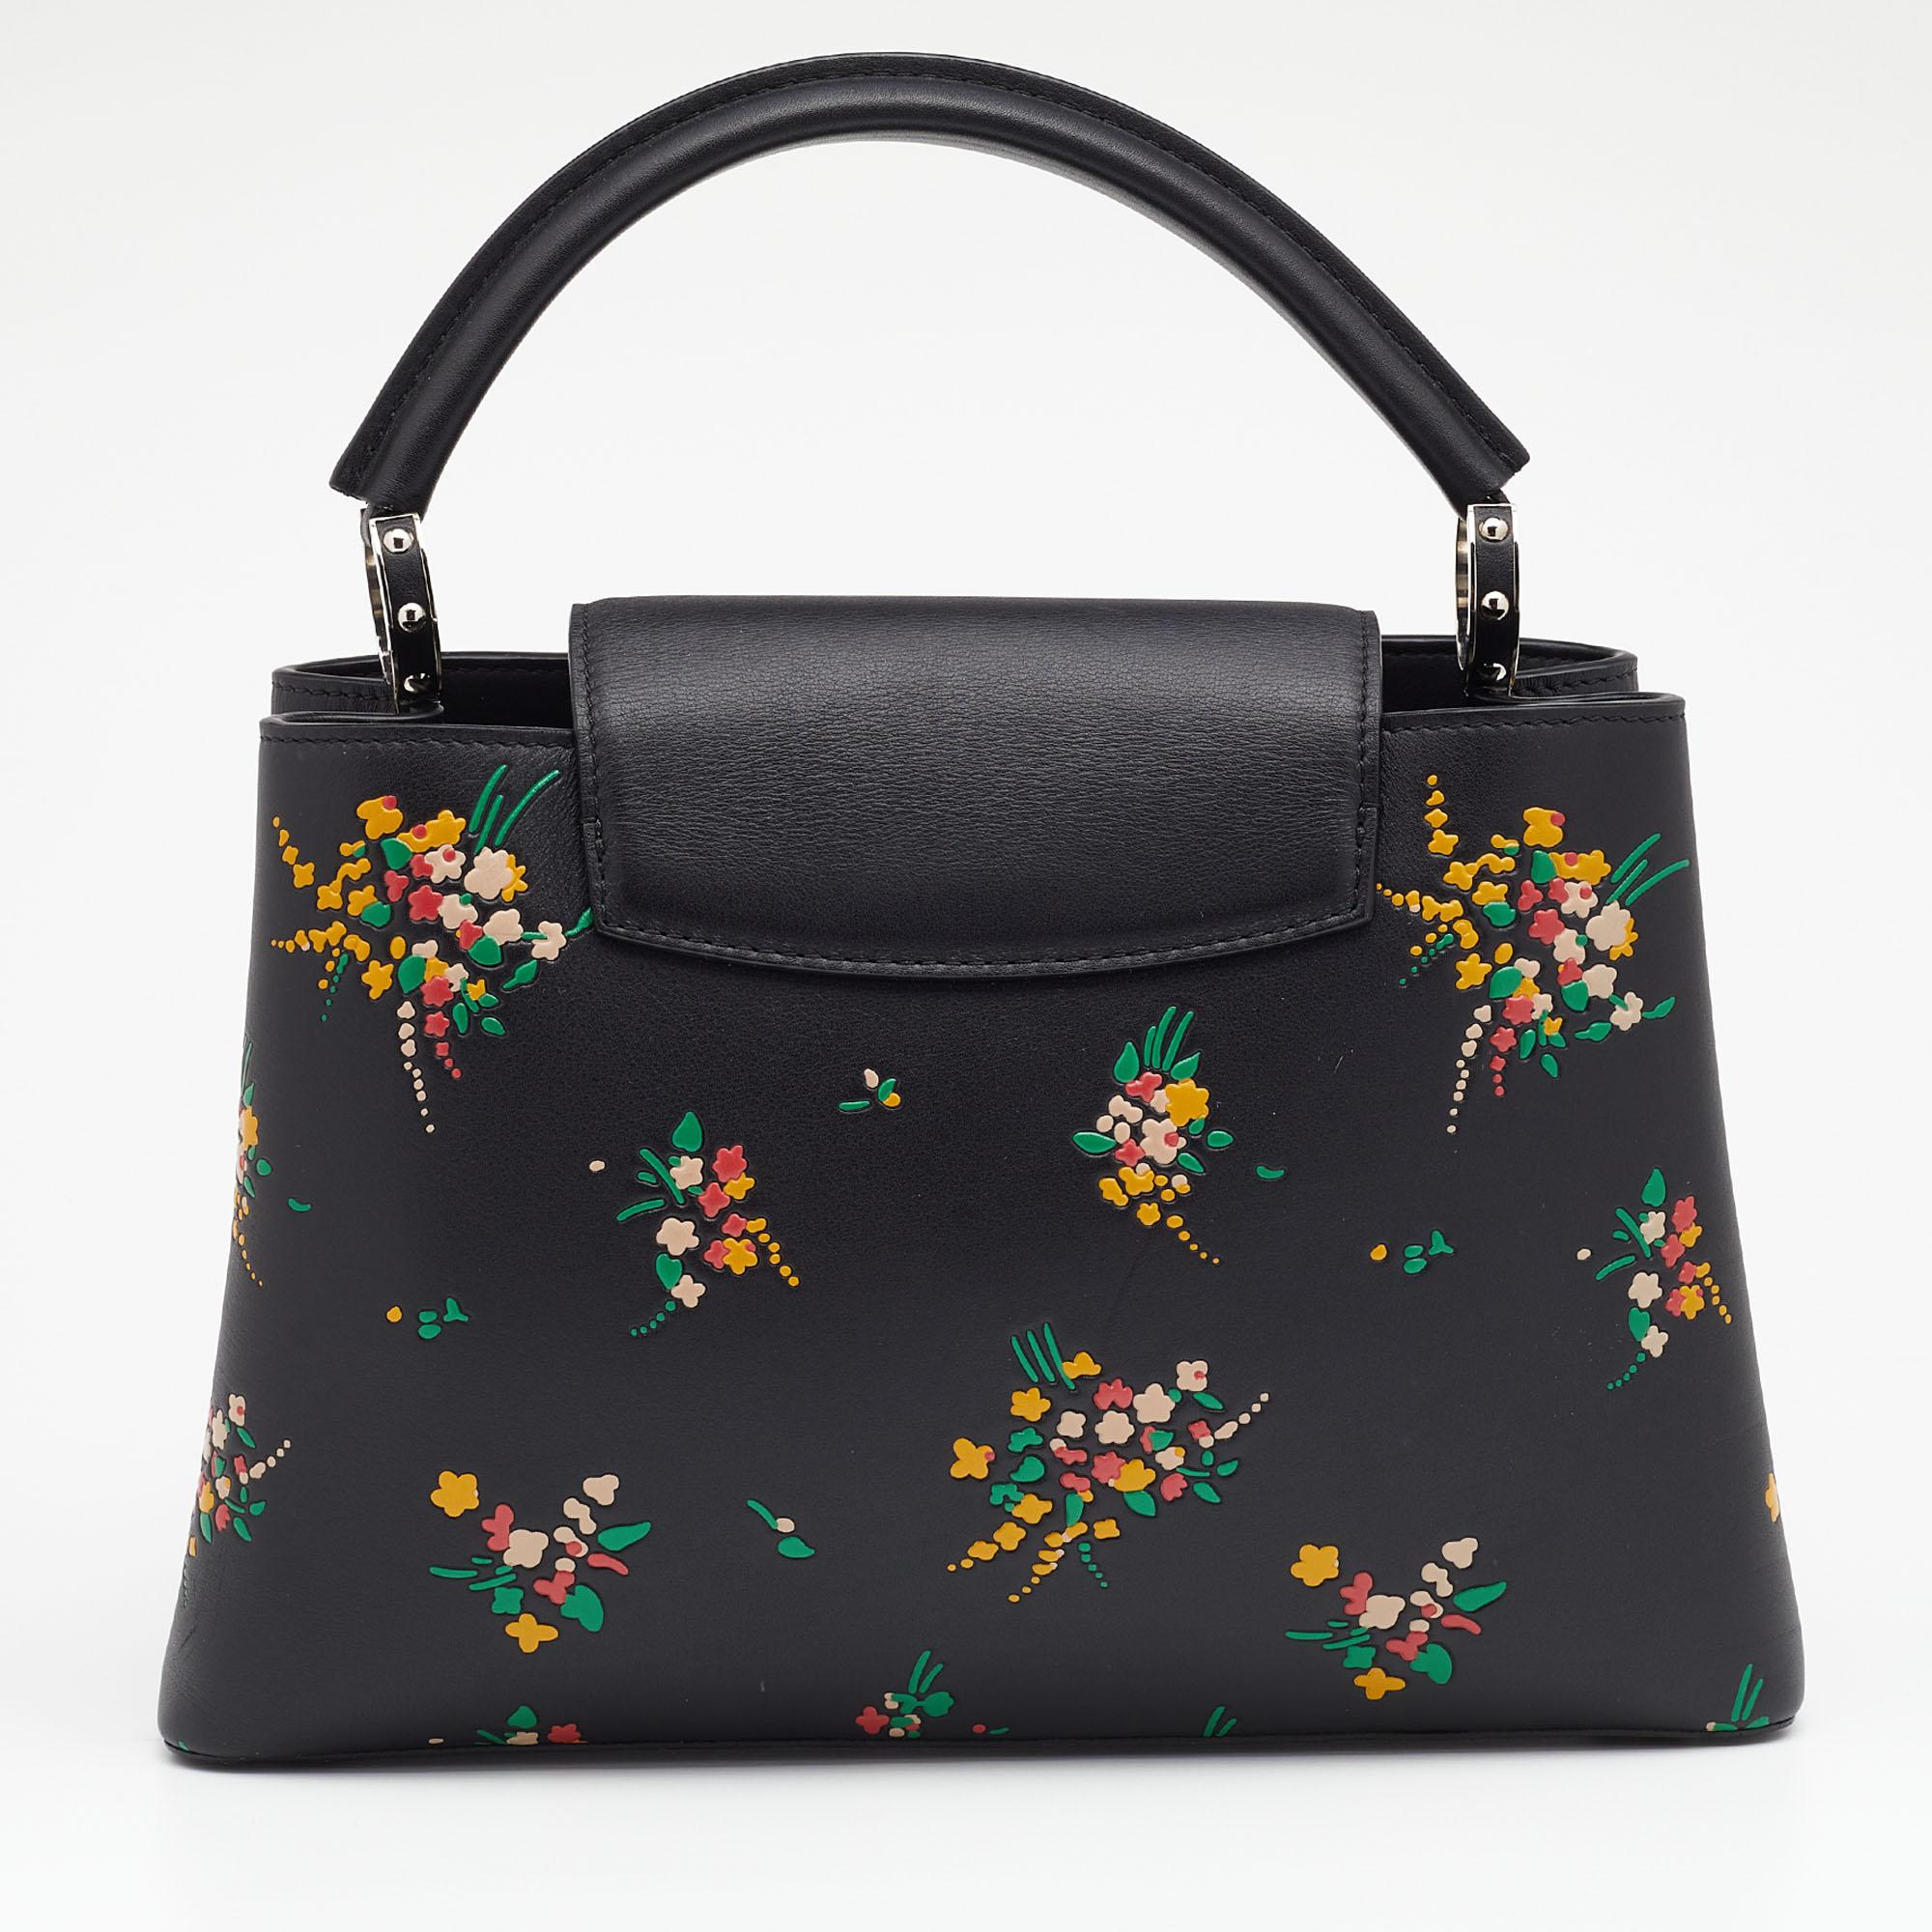 Merged beautifully with signature design, this Blossom Capucines PM bag from Louis Vuitton remains globally popular. This irresistible and elegant bag not just highlights your impeccable styling choices but also meets your practical demands. It is